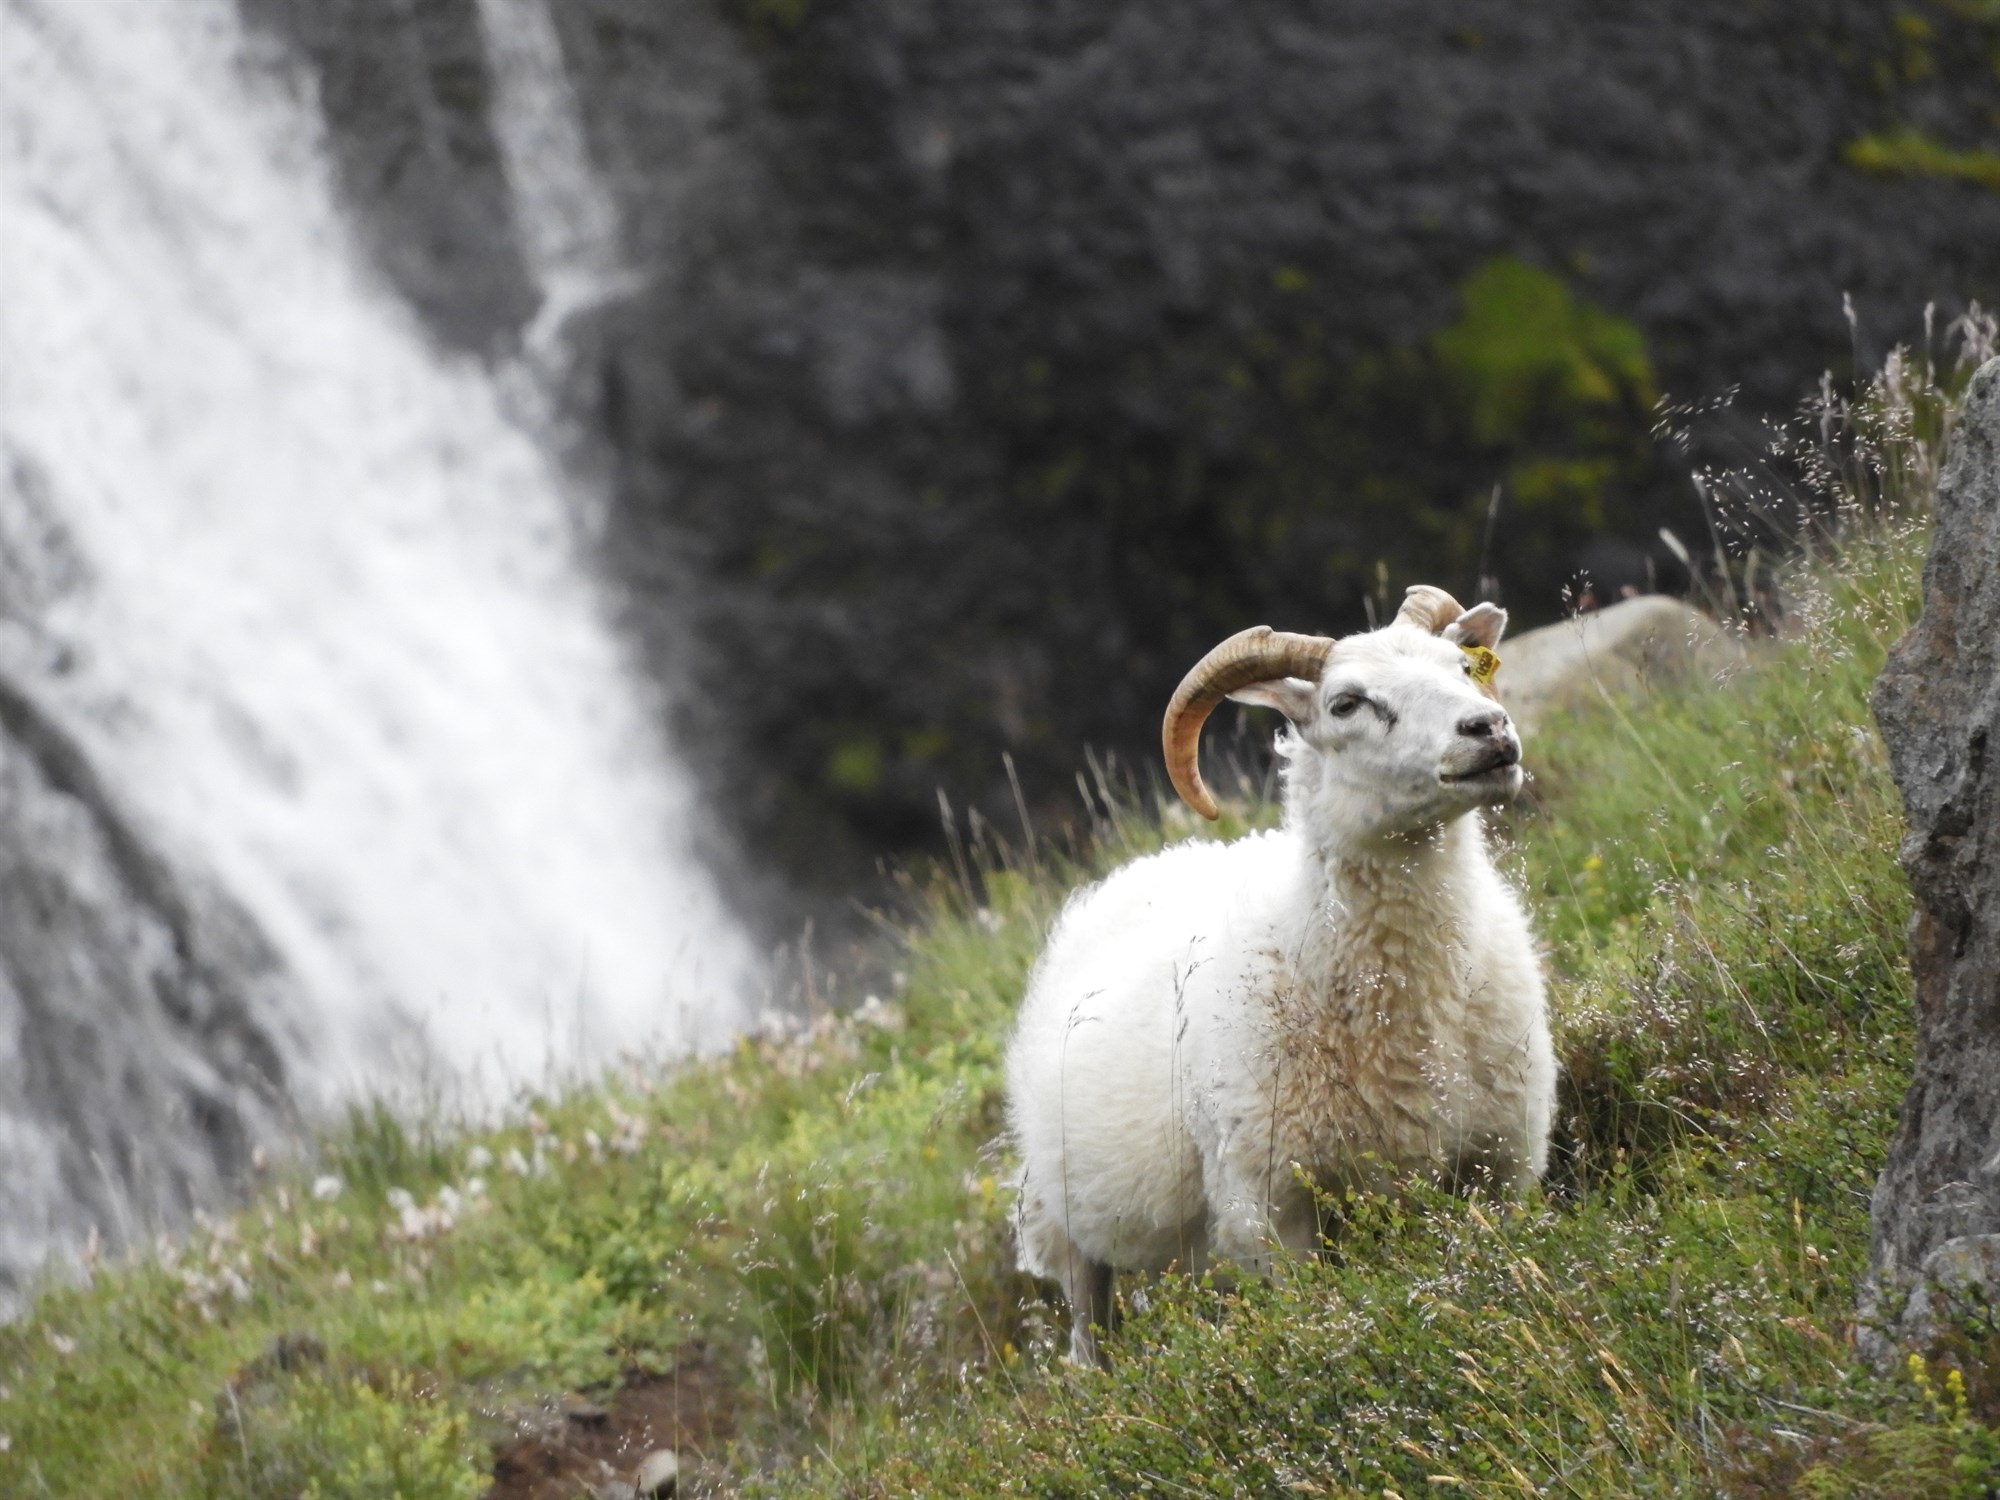 Iceland sheep at kvernufoss waterfall in south Iceland.